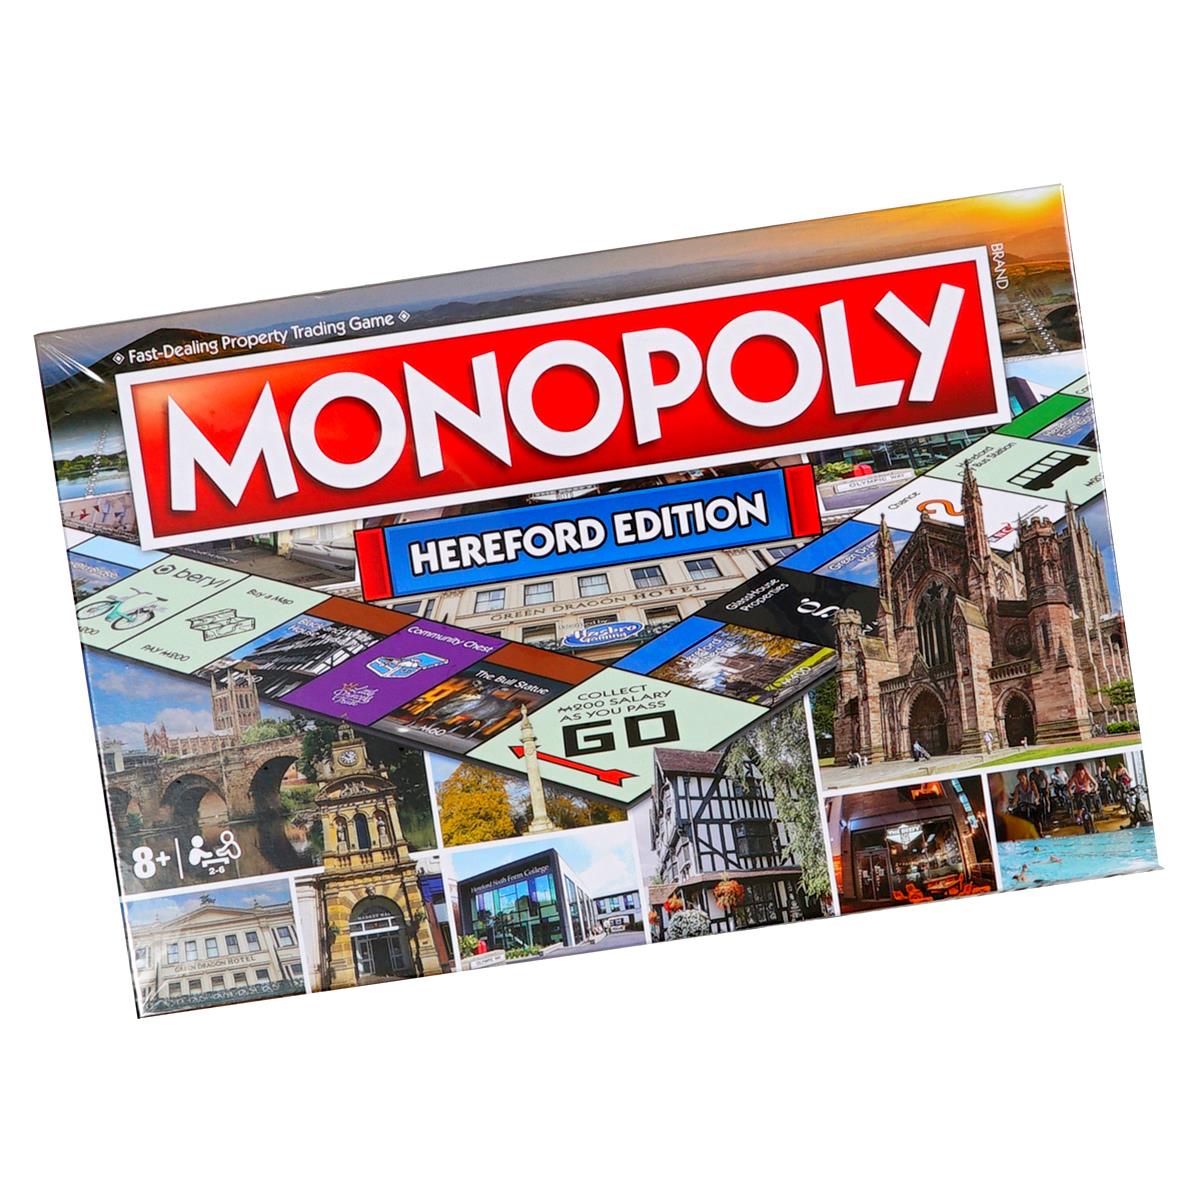 What are some products from Hereford that include the hereford monopoly board game?